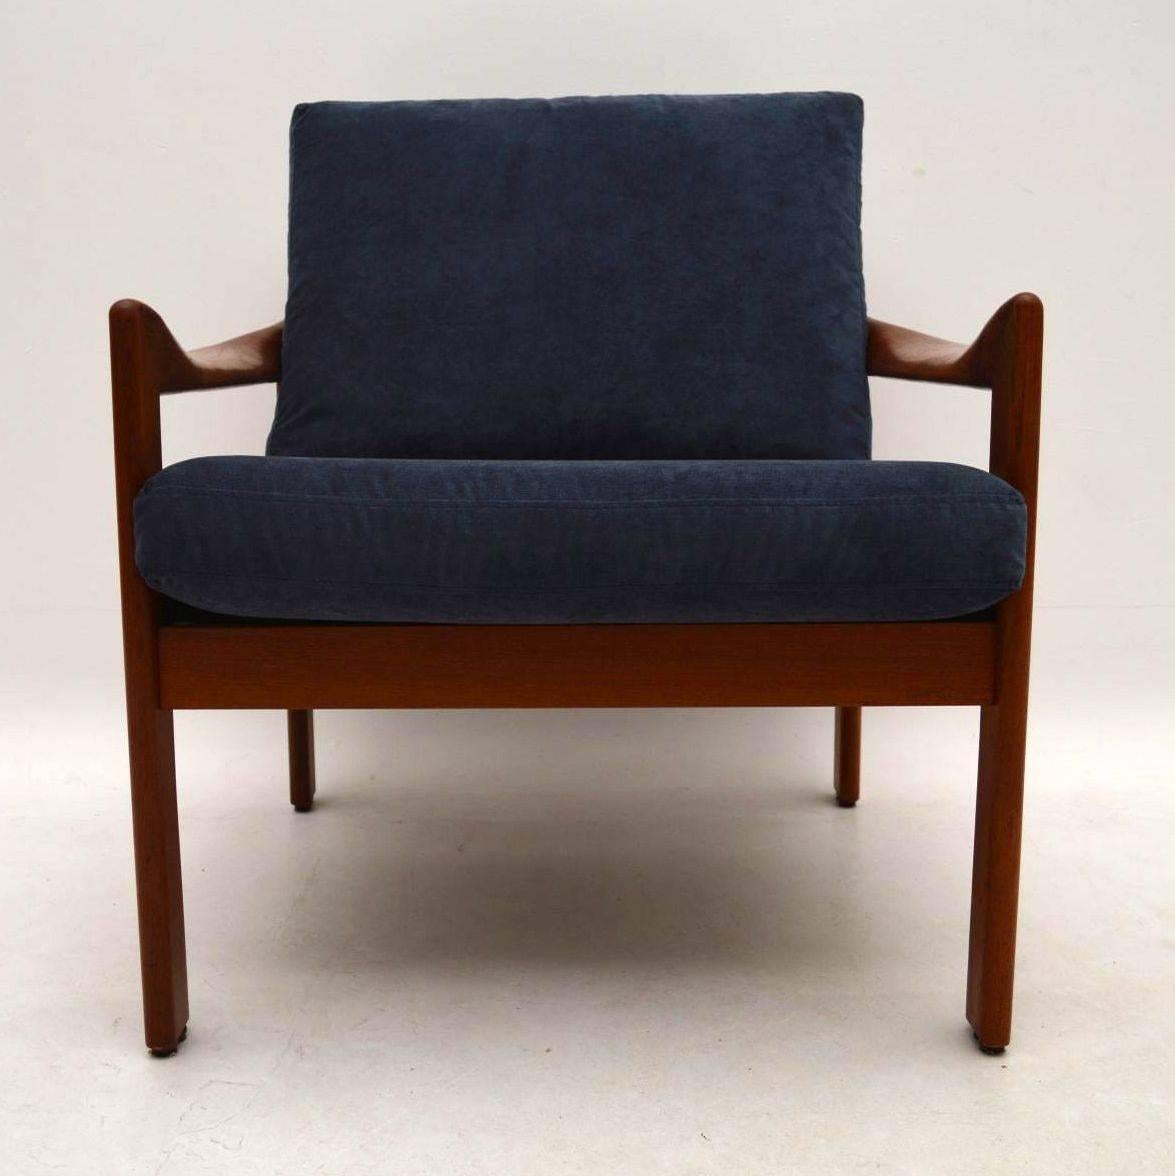 A stunning and rare Danish vintage armchair in solid teak, this was designed by Illum Wikkelso for Niels Eilersen, and it dates from the 1960s. The condition is superb for its age, the solid teak frame is clean, sturdy and sound; we have had the